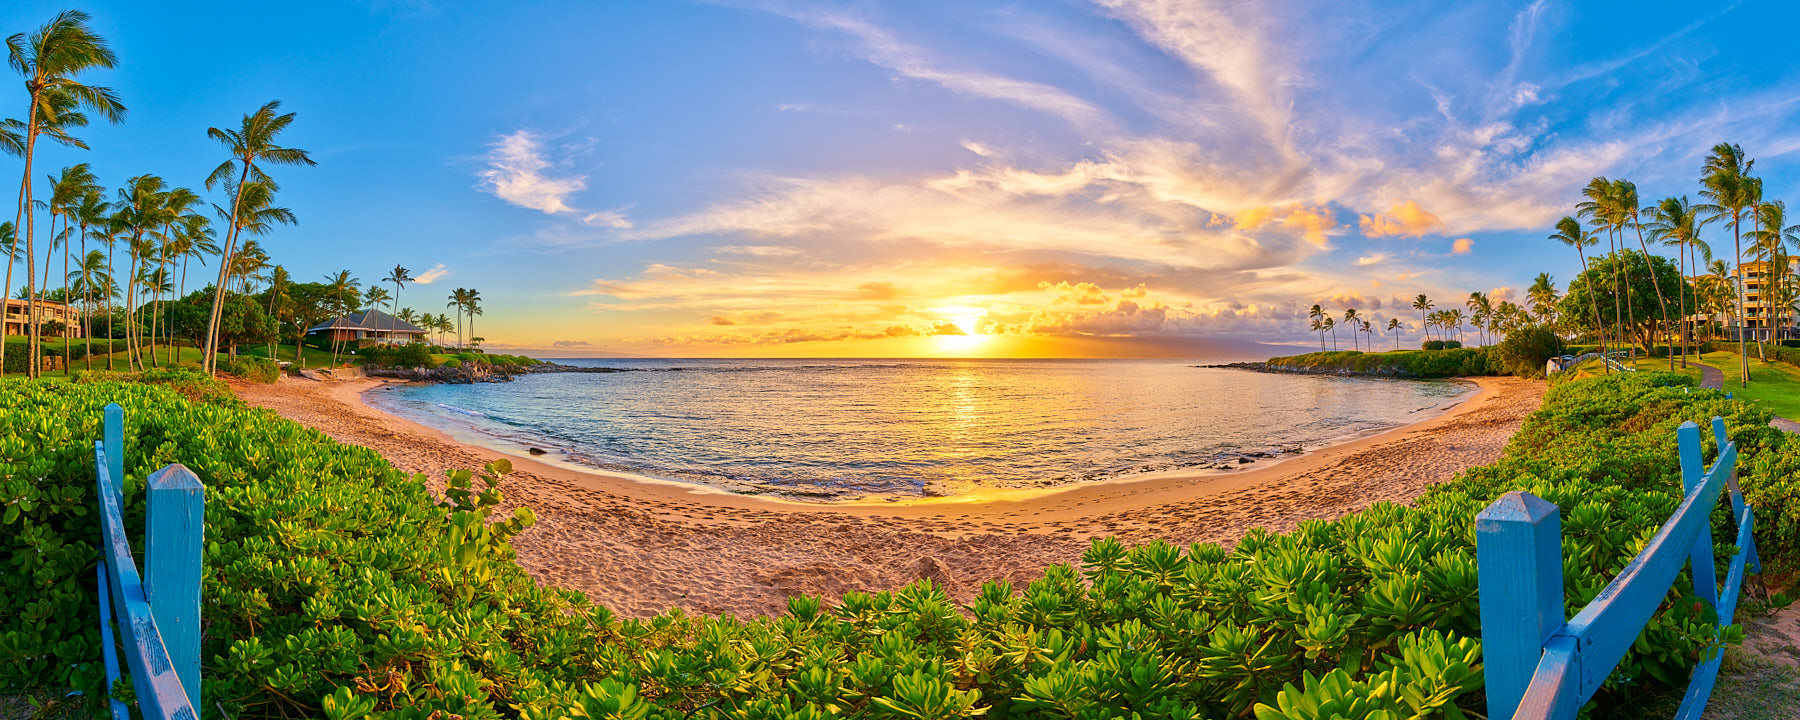 panoramic capture of the beautiful Kapalua Bay Beach Maui at sunset with a blue fence and surrounded by palm trees.  Fine art by photographer Andrew Shoemaker